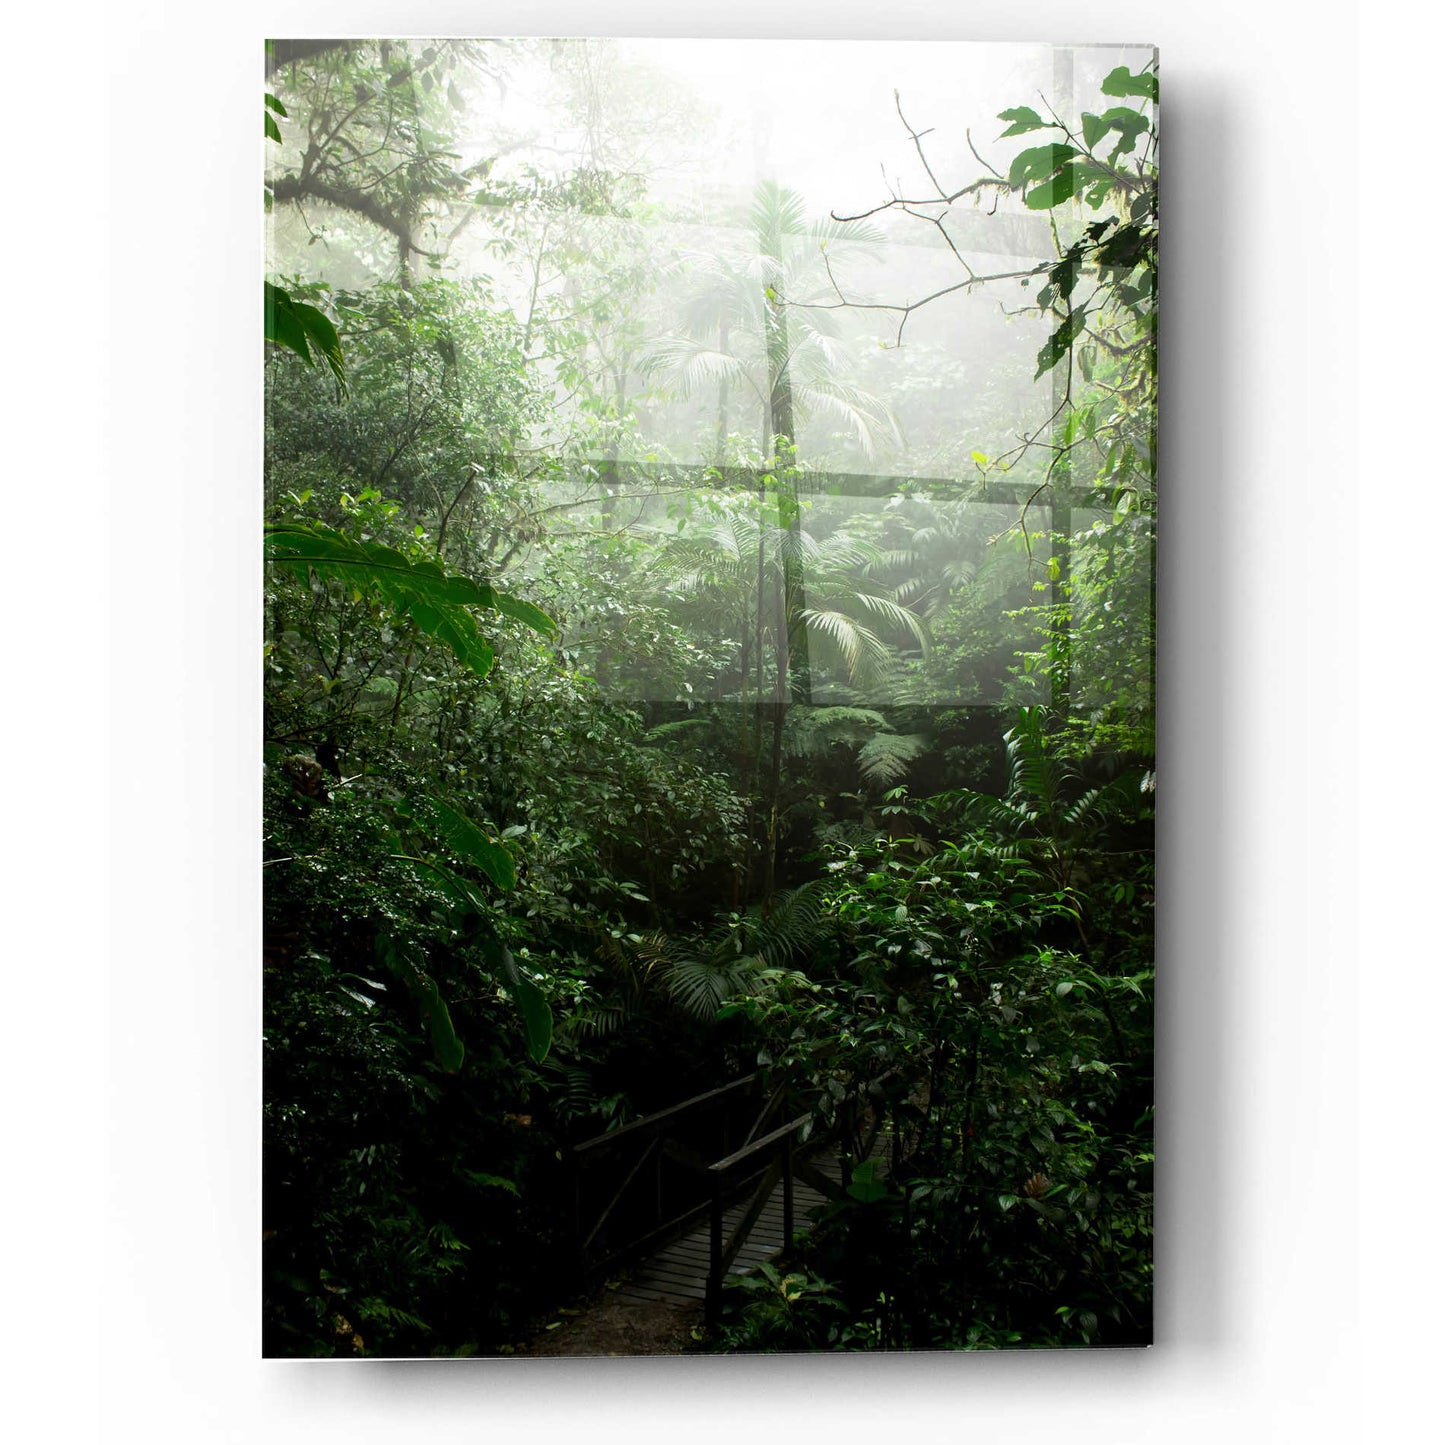 Epic Art 'Into The Cloud Forest' by Nicklas Gustafsson Acrylic Glass Wall Art,12x16